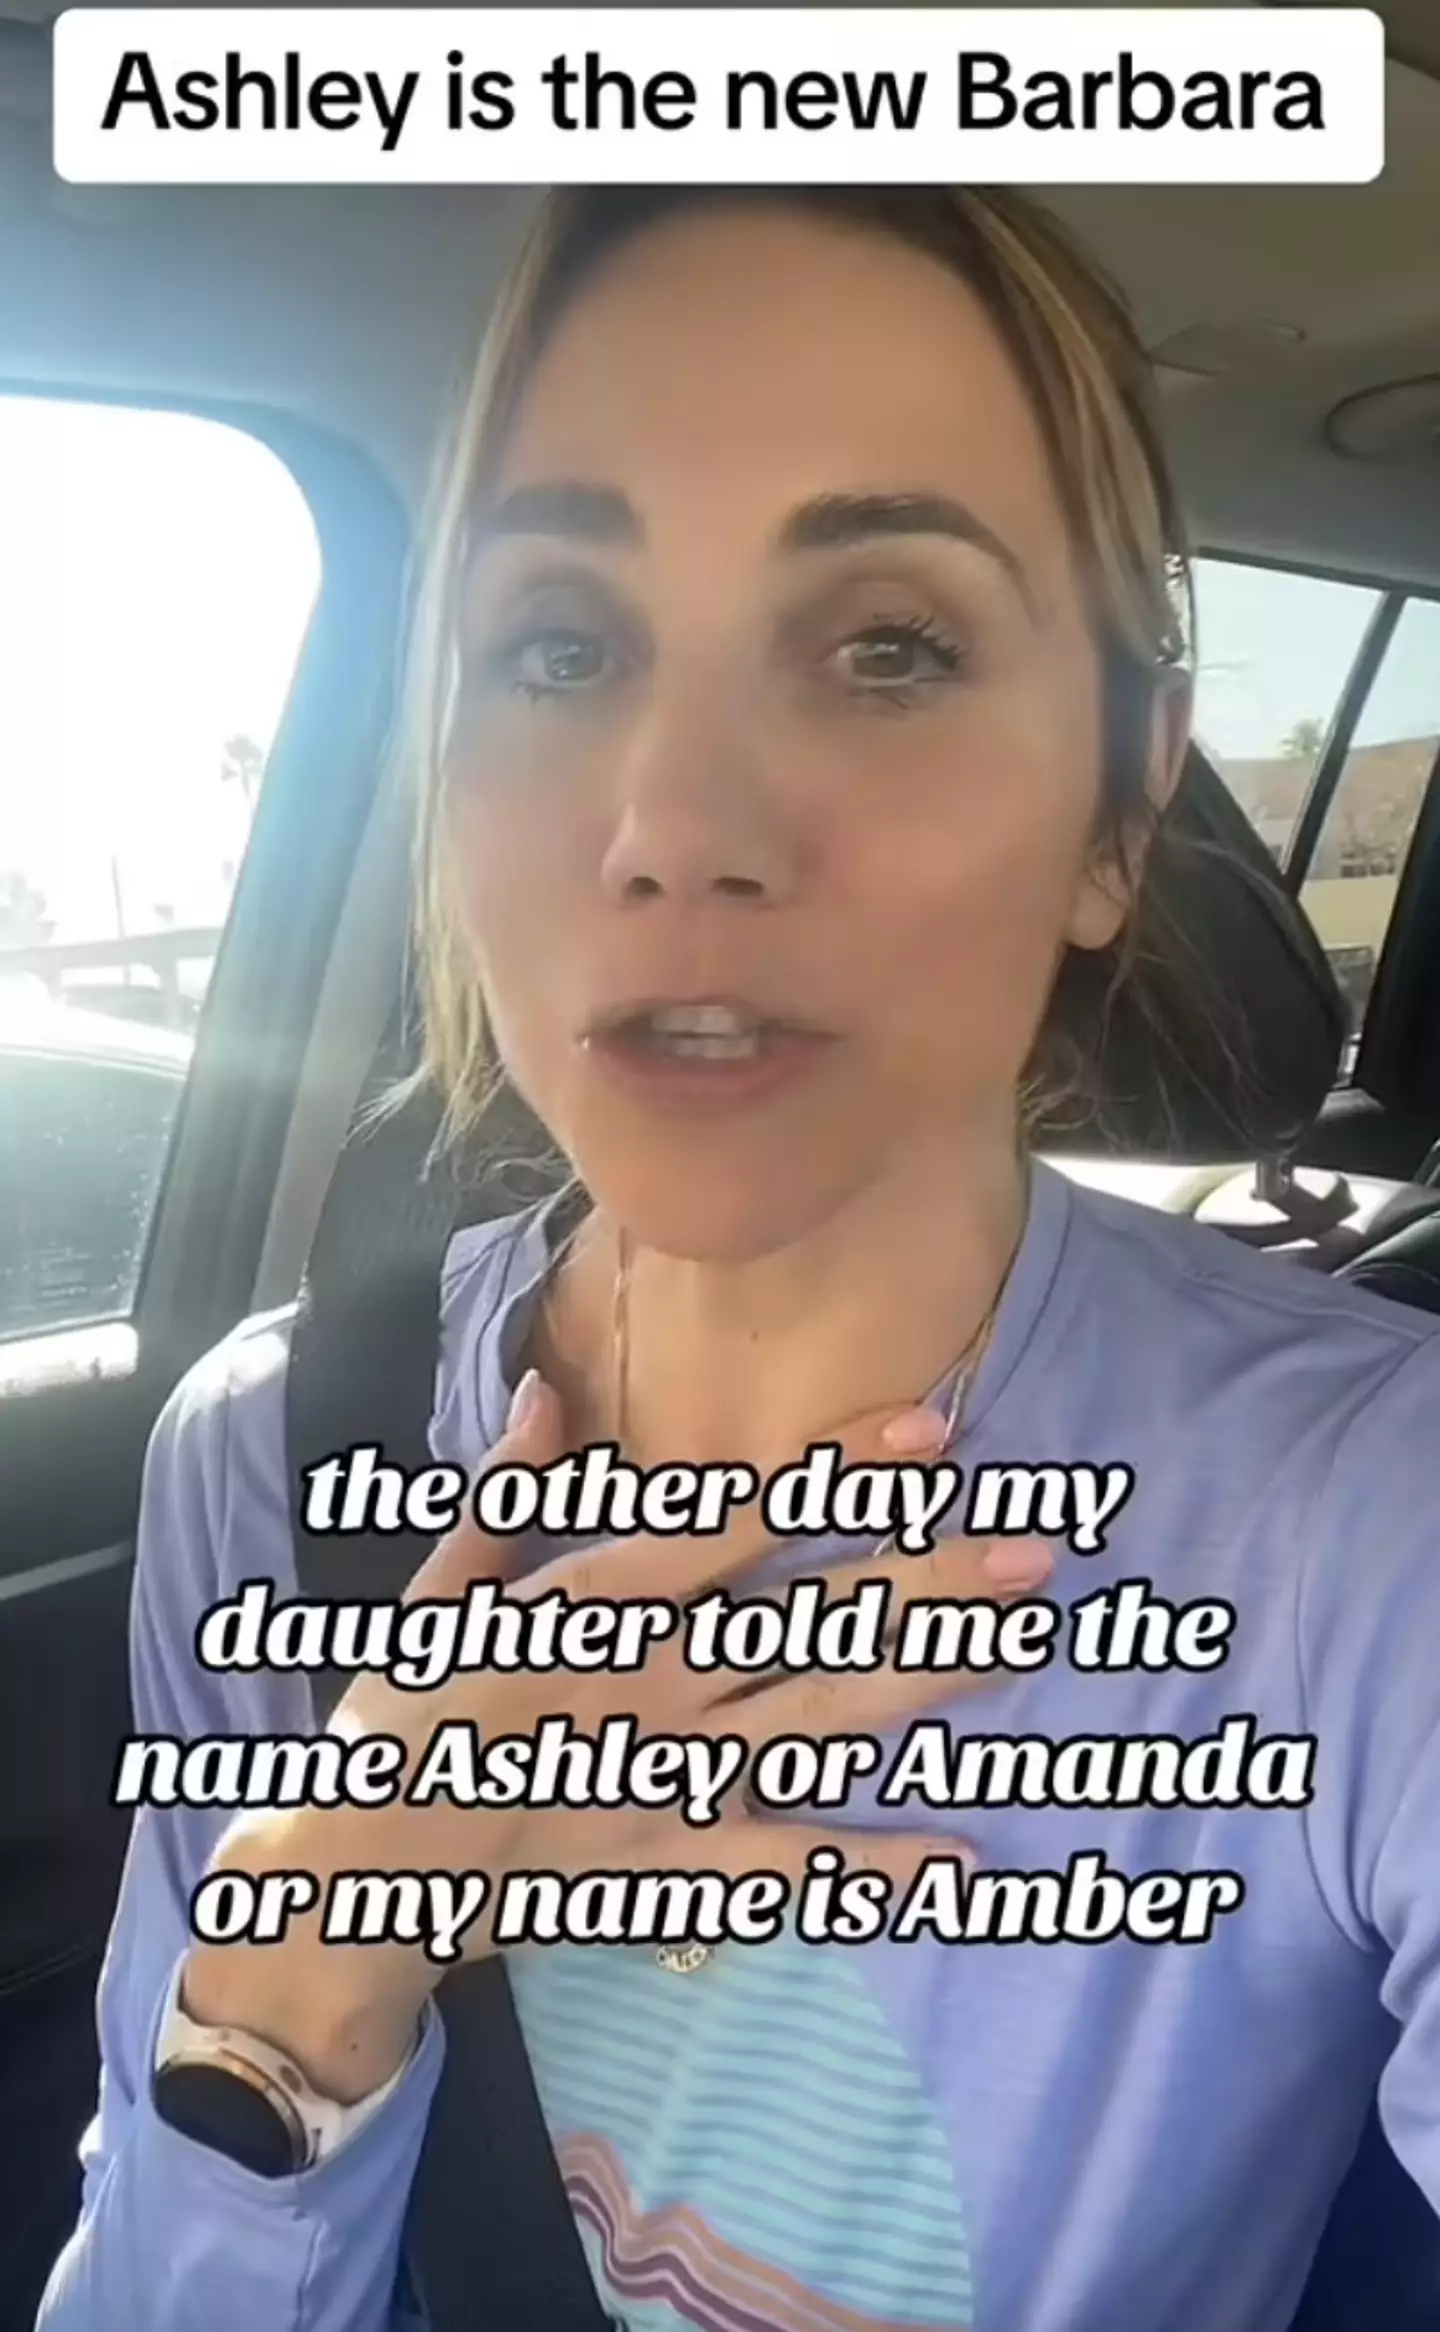 The millennial mum was shocked by her daughter’s definition of ‘old people’ names.